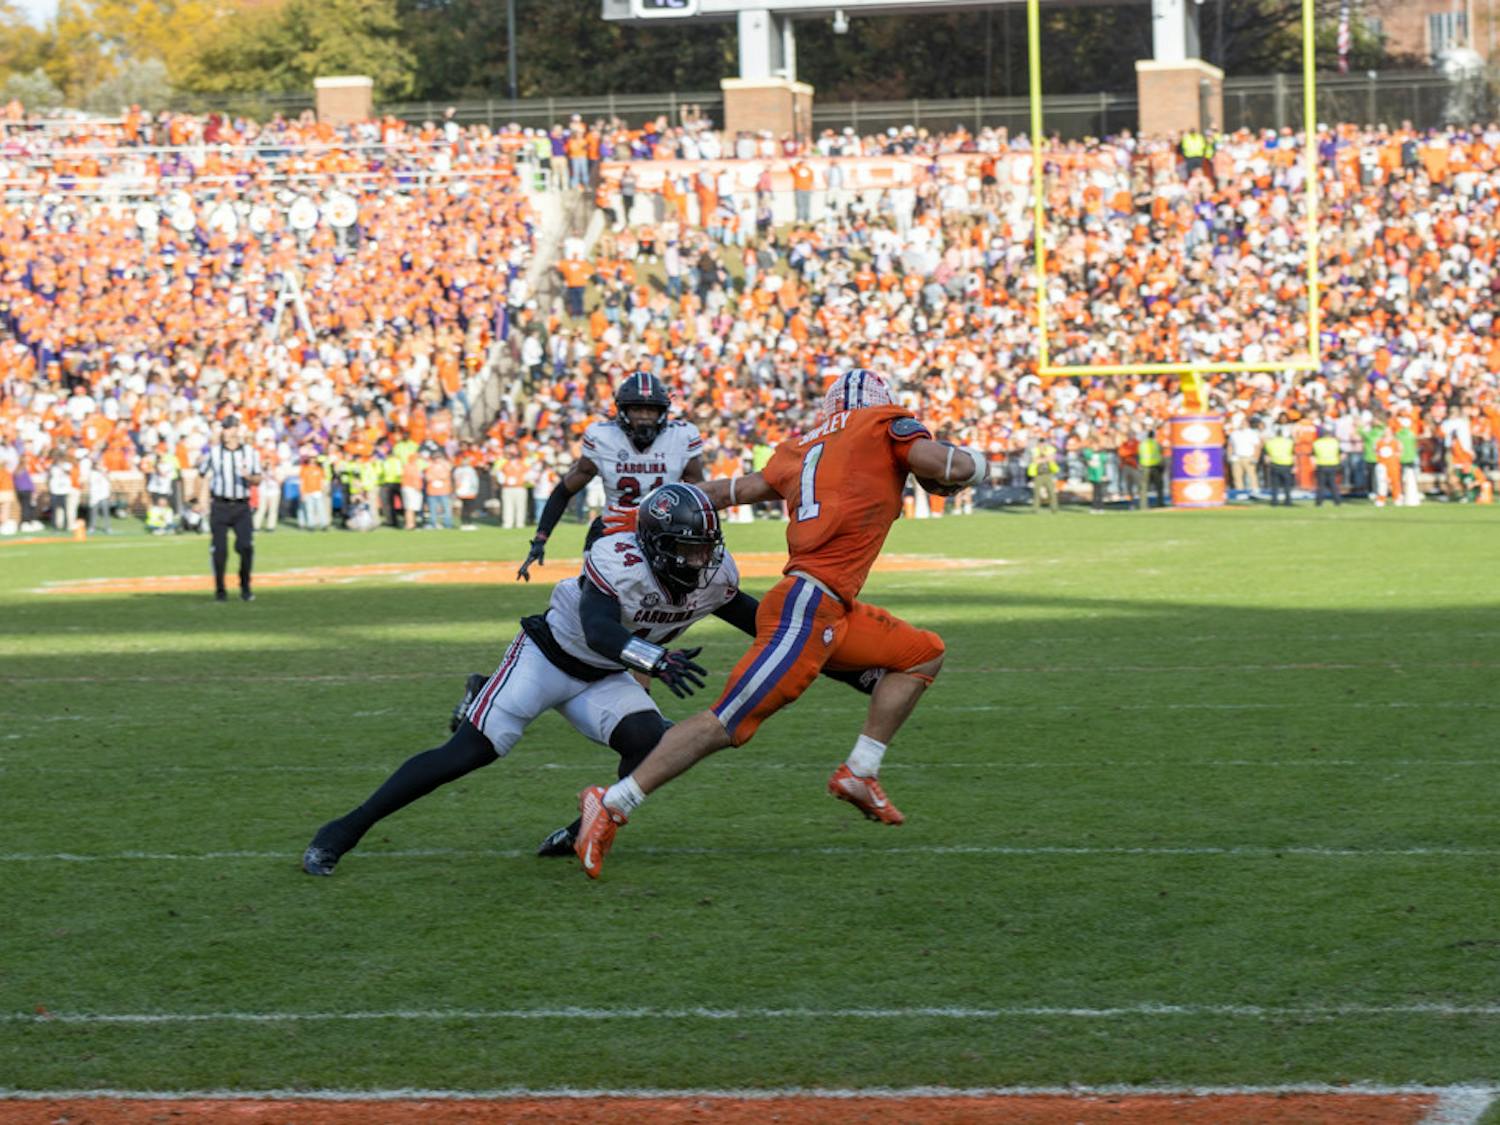 Sixth-year linebacker Sherrod Greene dives for a Clemson player on Nov. 26, 2022 at Memorial Stadium. Greene made the tackle against Clemson, bringing his total to 5 for the game.